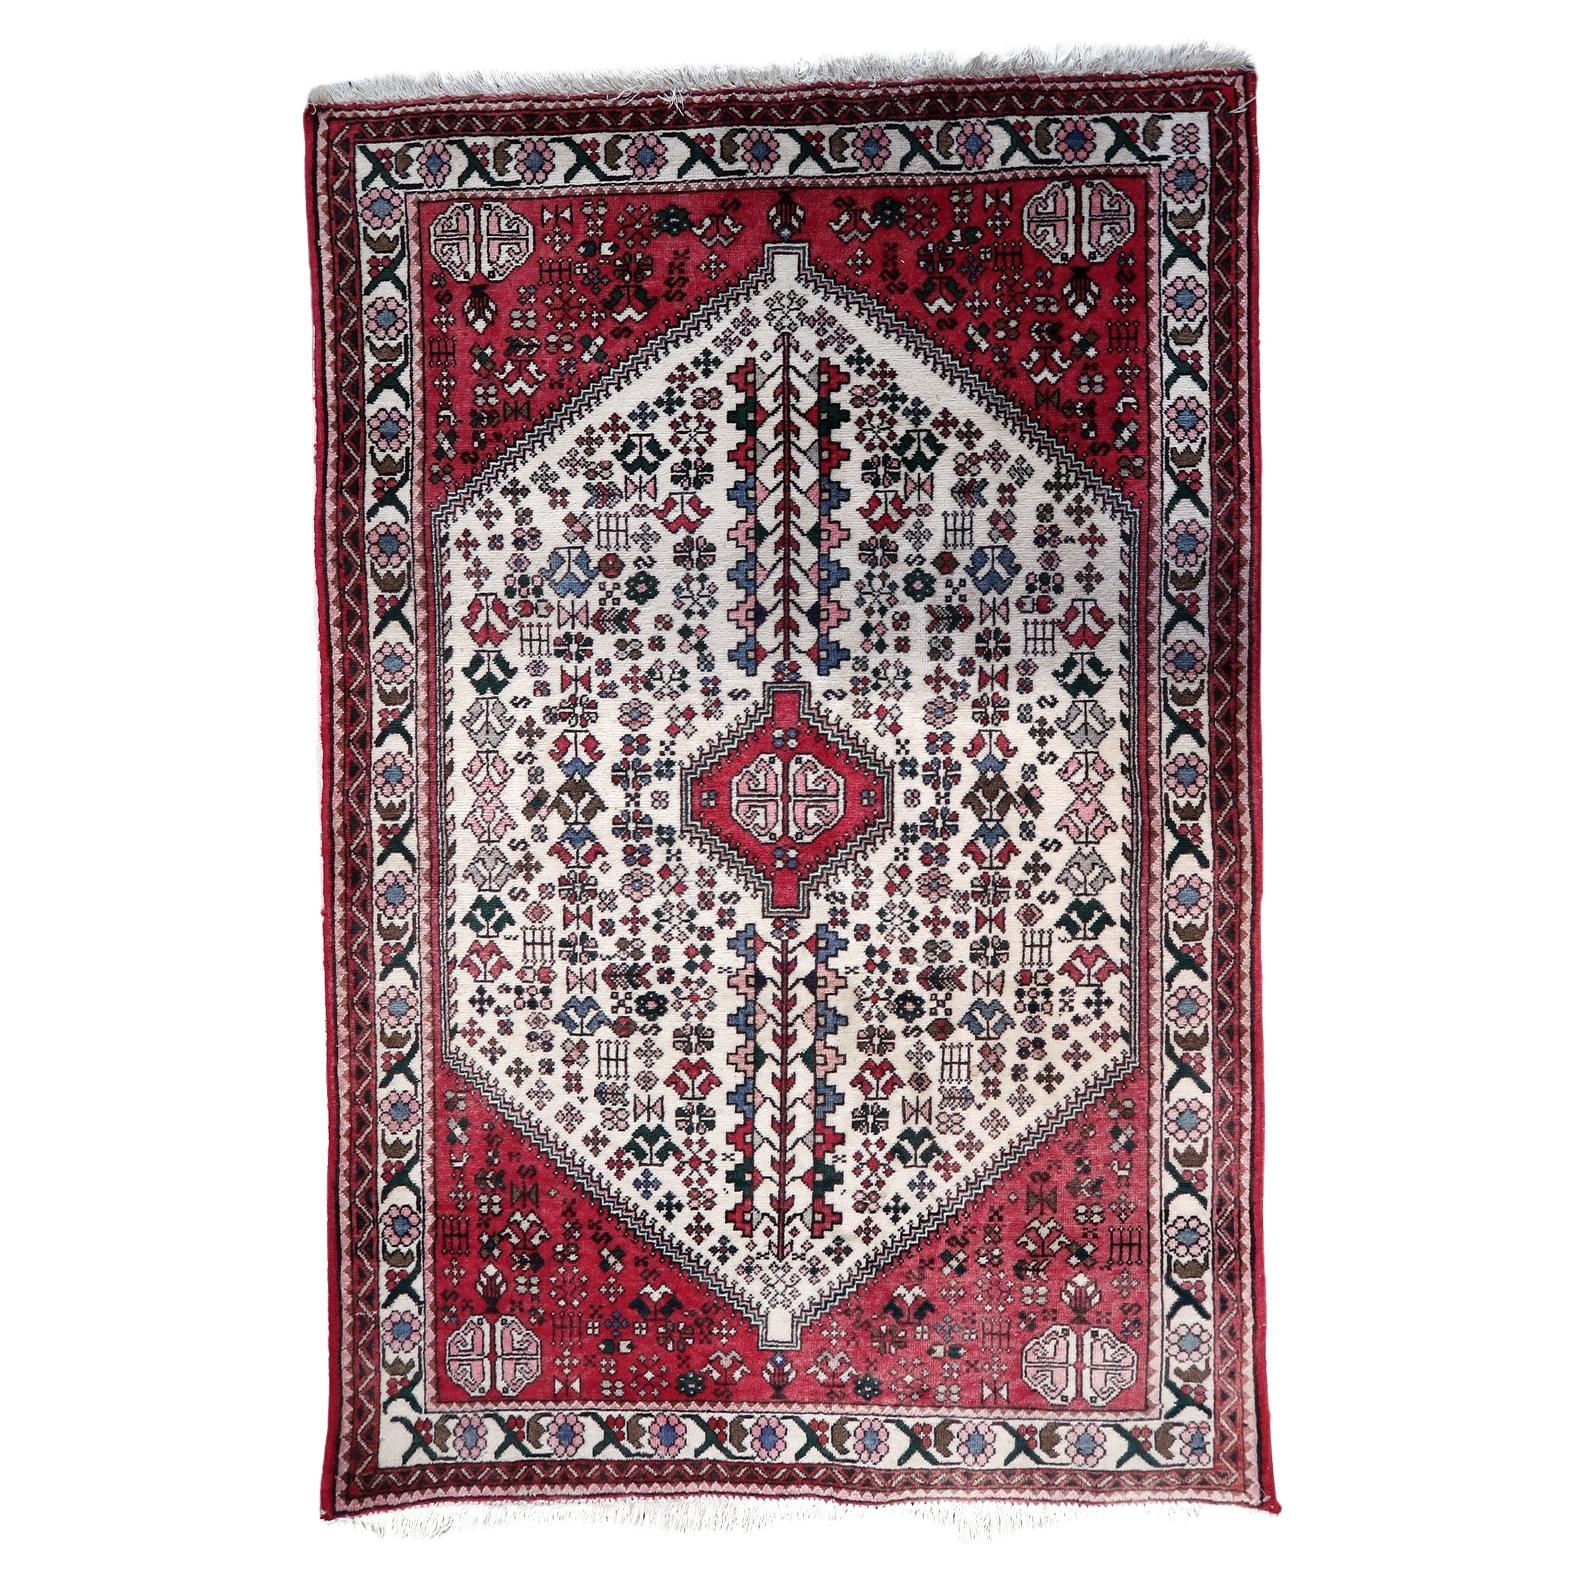 Handmade Vintage Persian Style Malayer Rug 3.2' x 4.9', 1970s - 1C1120 For Sale